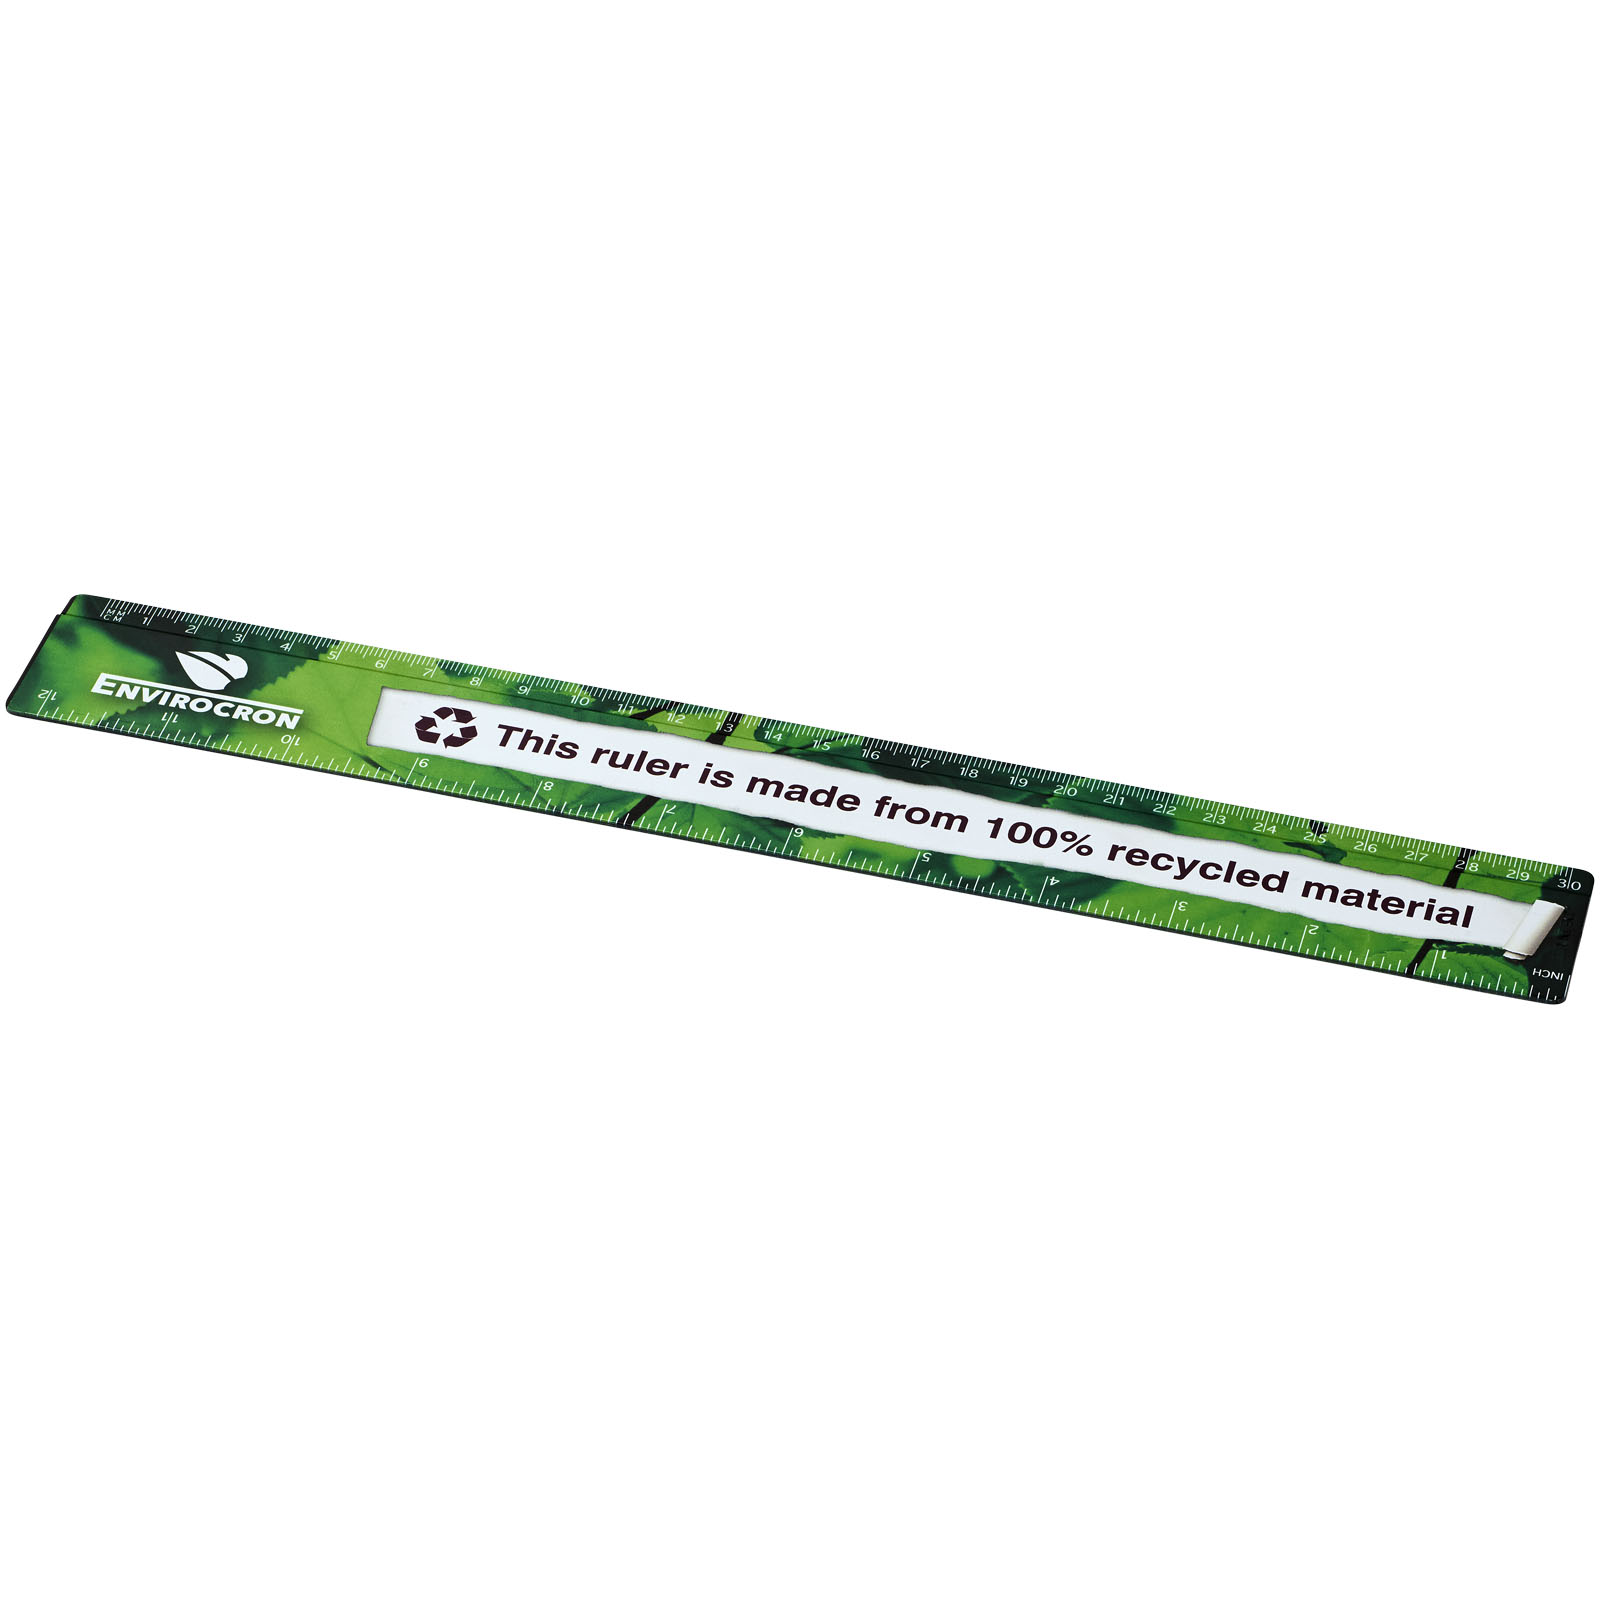 Desk Accessories - Terran 30 cm ruler from 100% recycled plastic